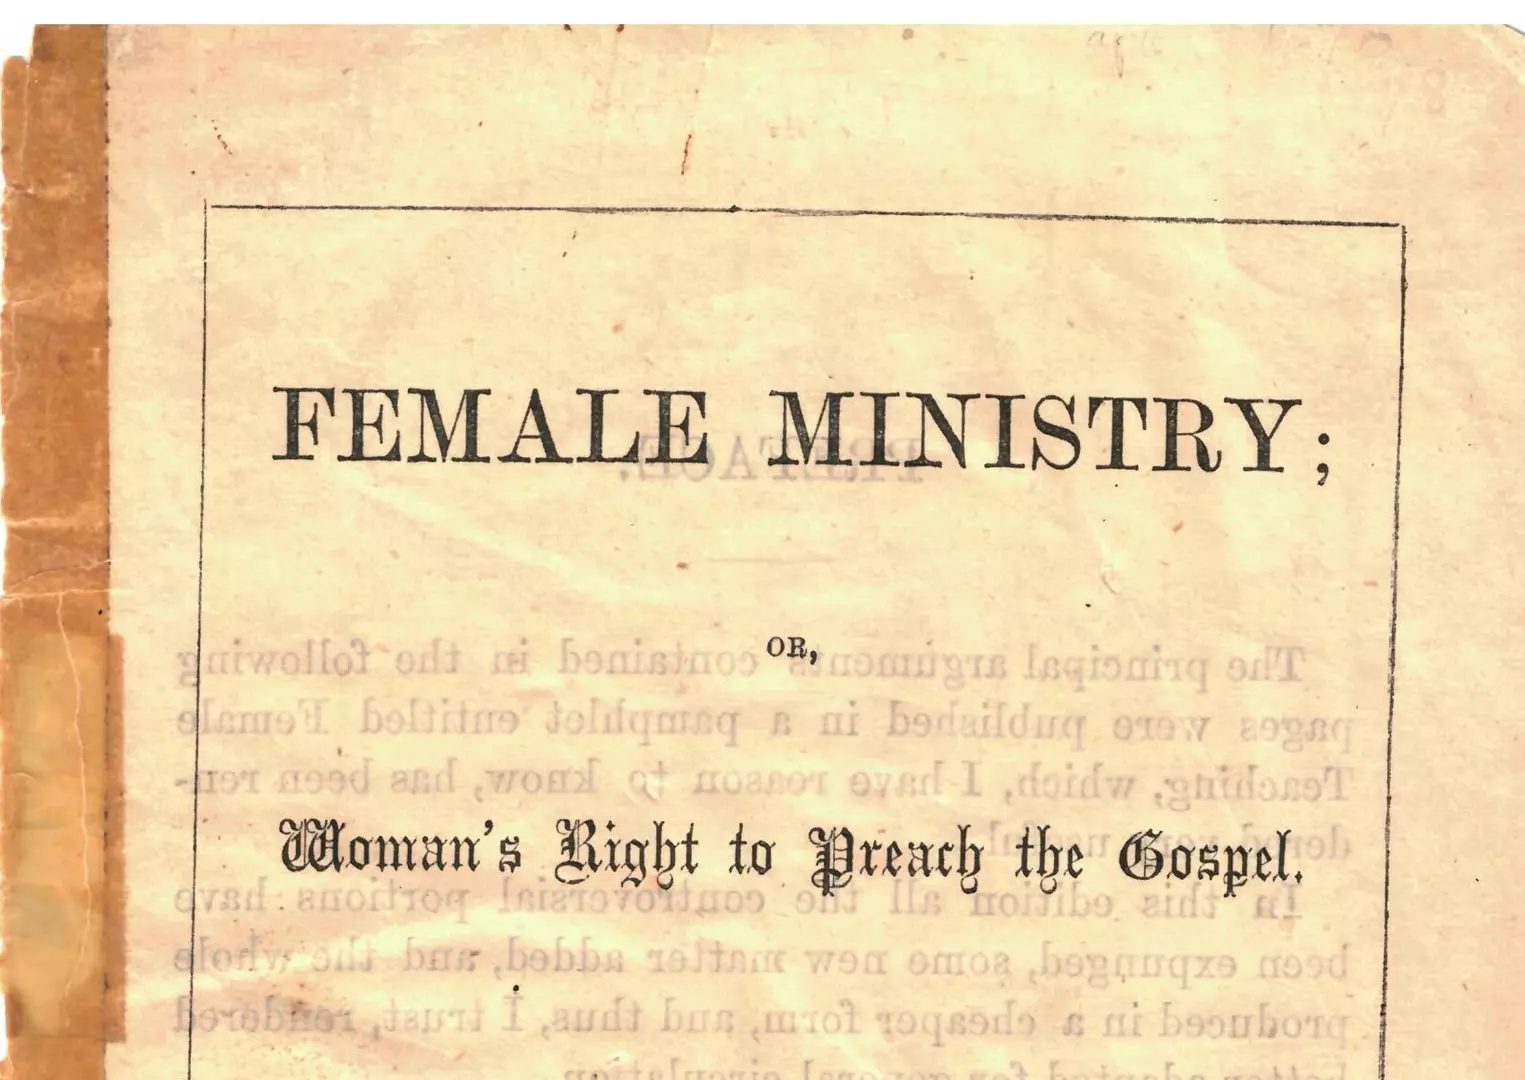 Female Ministry by Catherine Booth